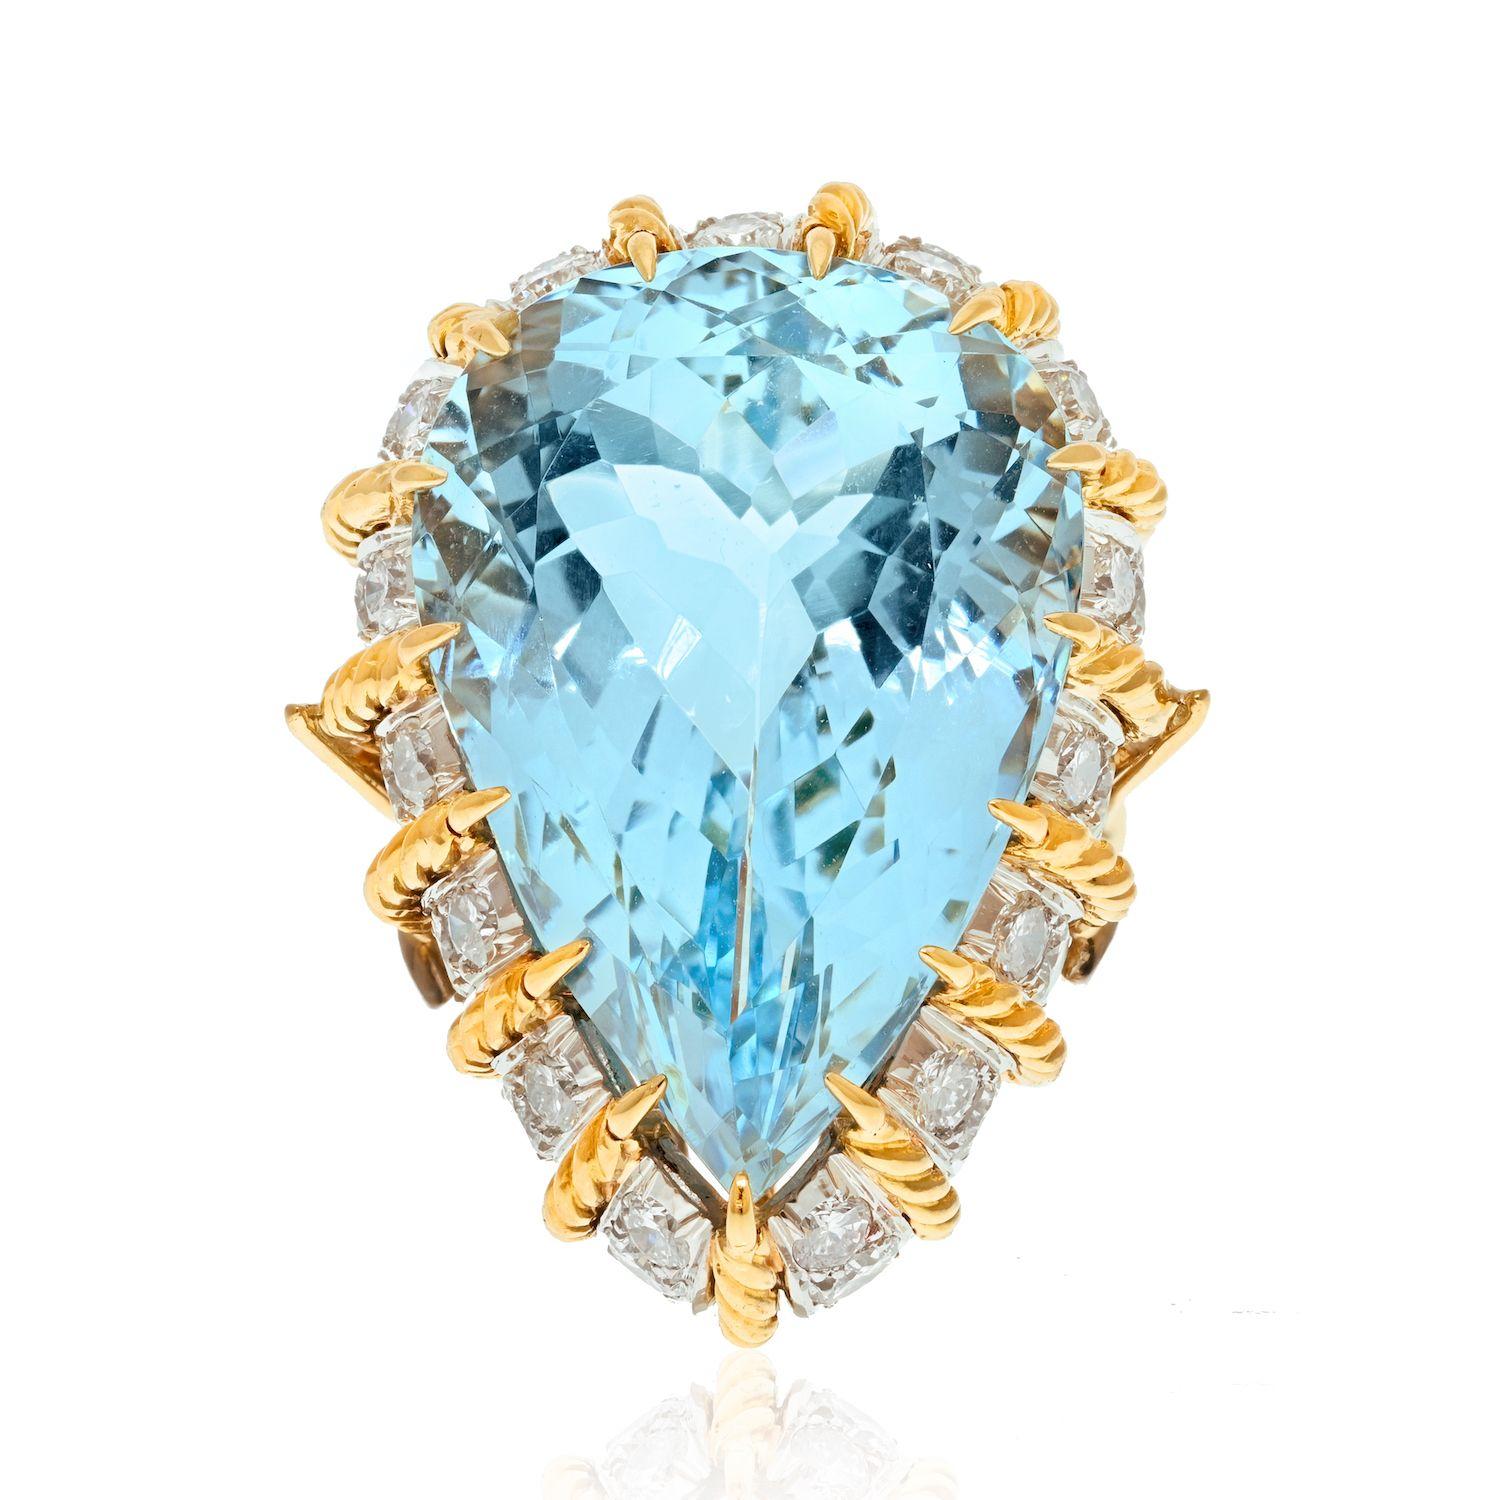 18K Yellow Gold 45 Carat Aquamarine And Diamond Fashion Cocktail Fine Estate Ring.
Extra large pear cut aquamarine mounted in a diamond and gold wire like frame. Spectacular size of the aquamarine is a perfect focal point of your hand. Be ready this